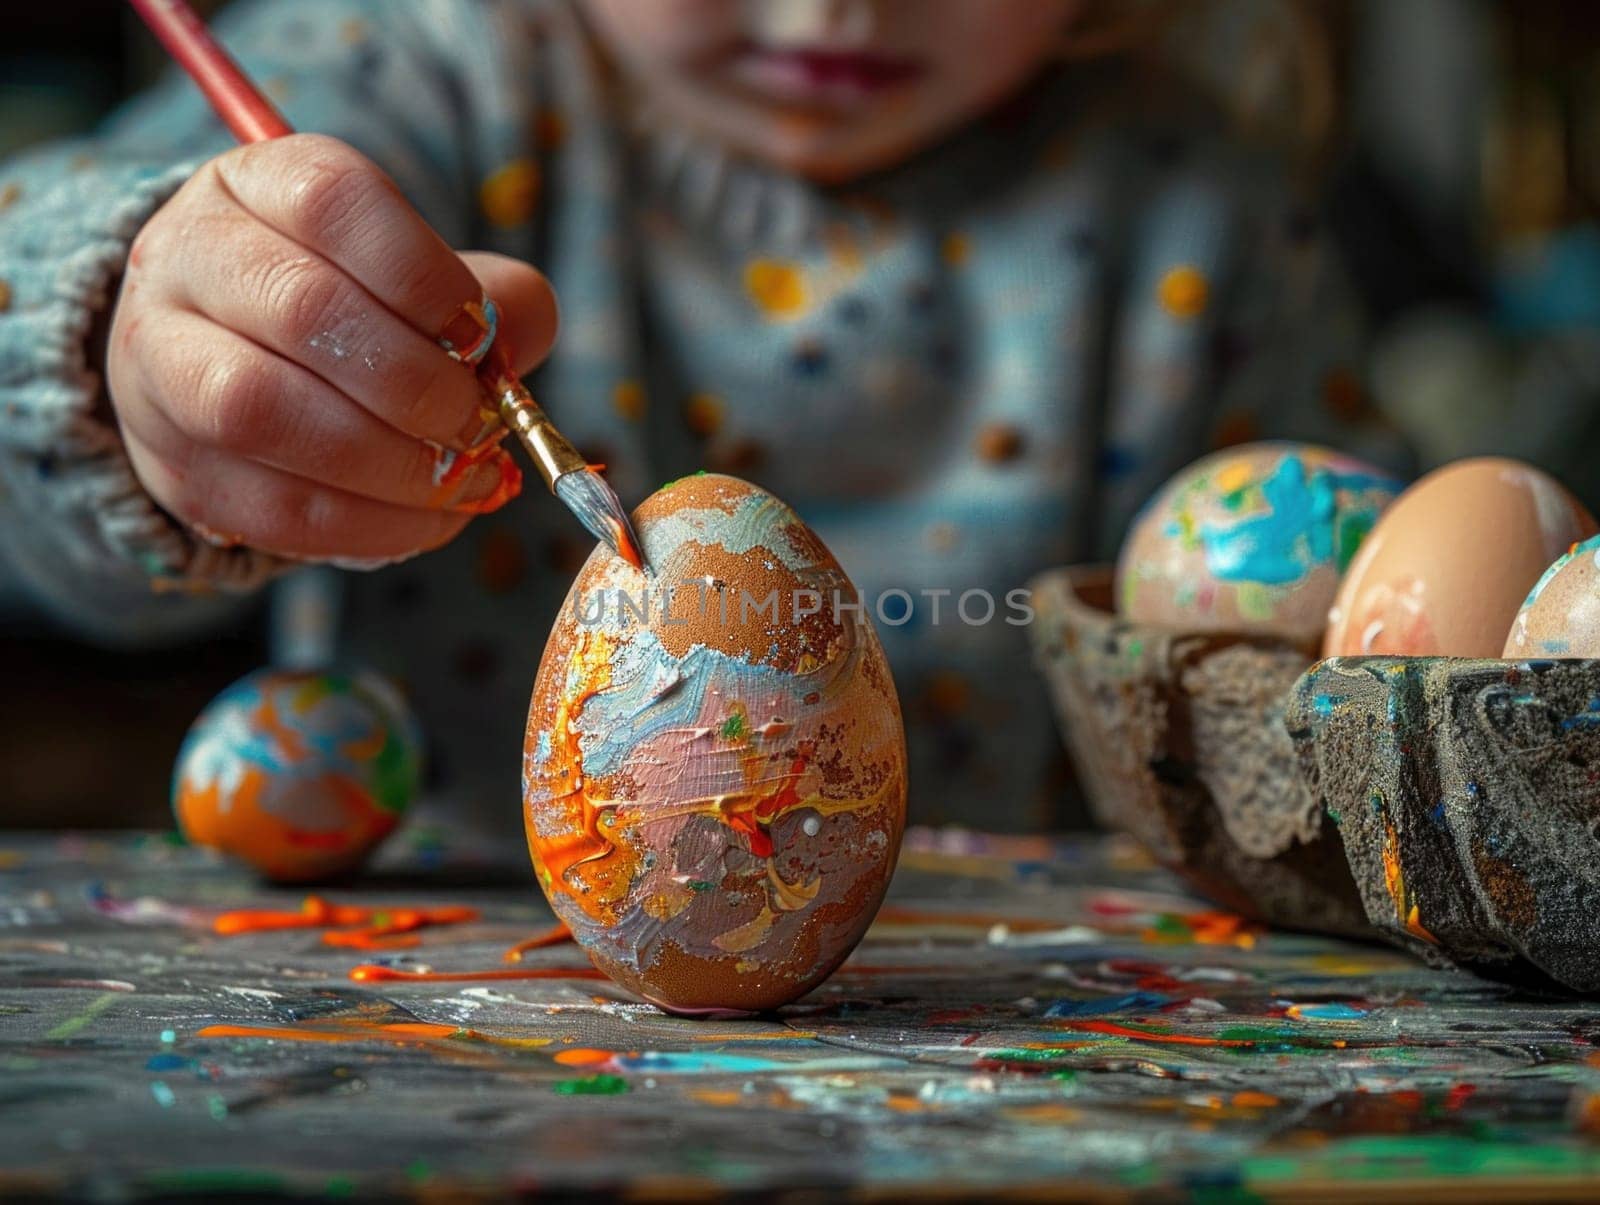 A little girl is meticulously painting an egg with a brush in preparation for Easter celebrations.